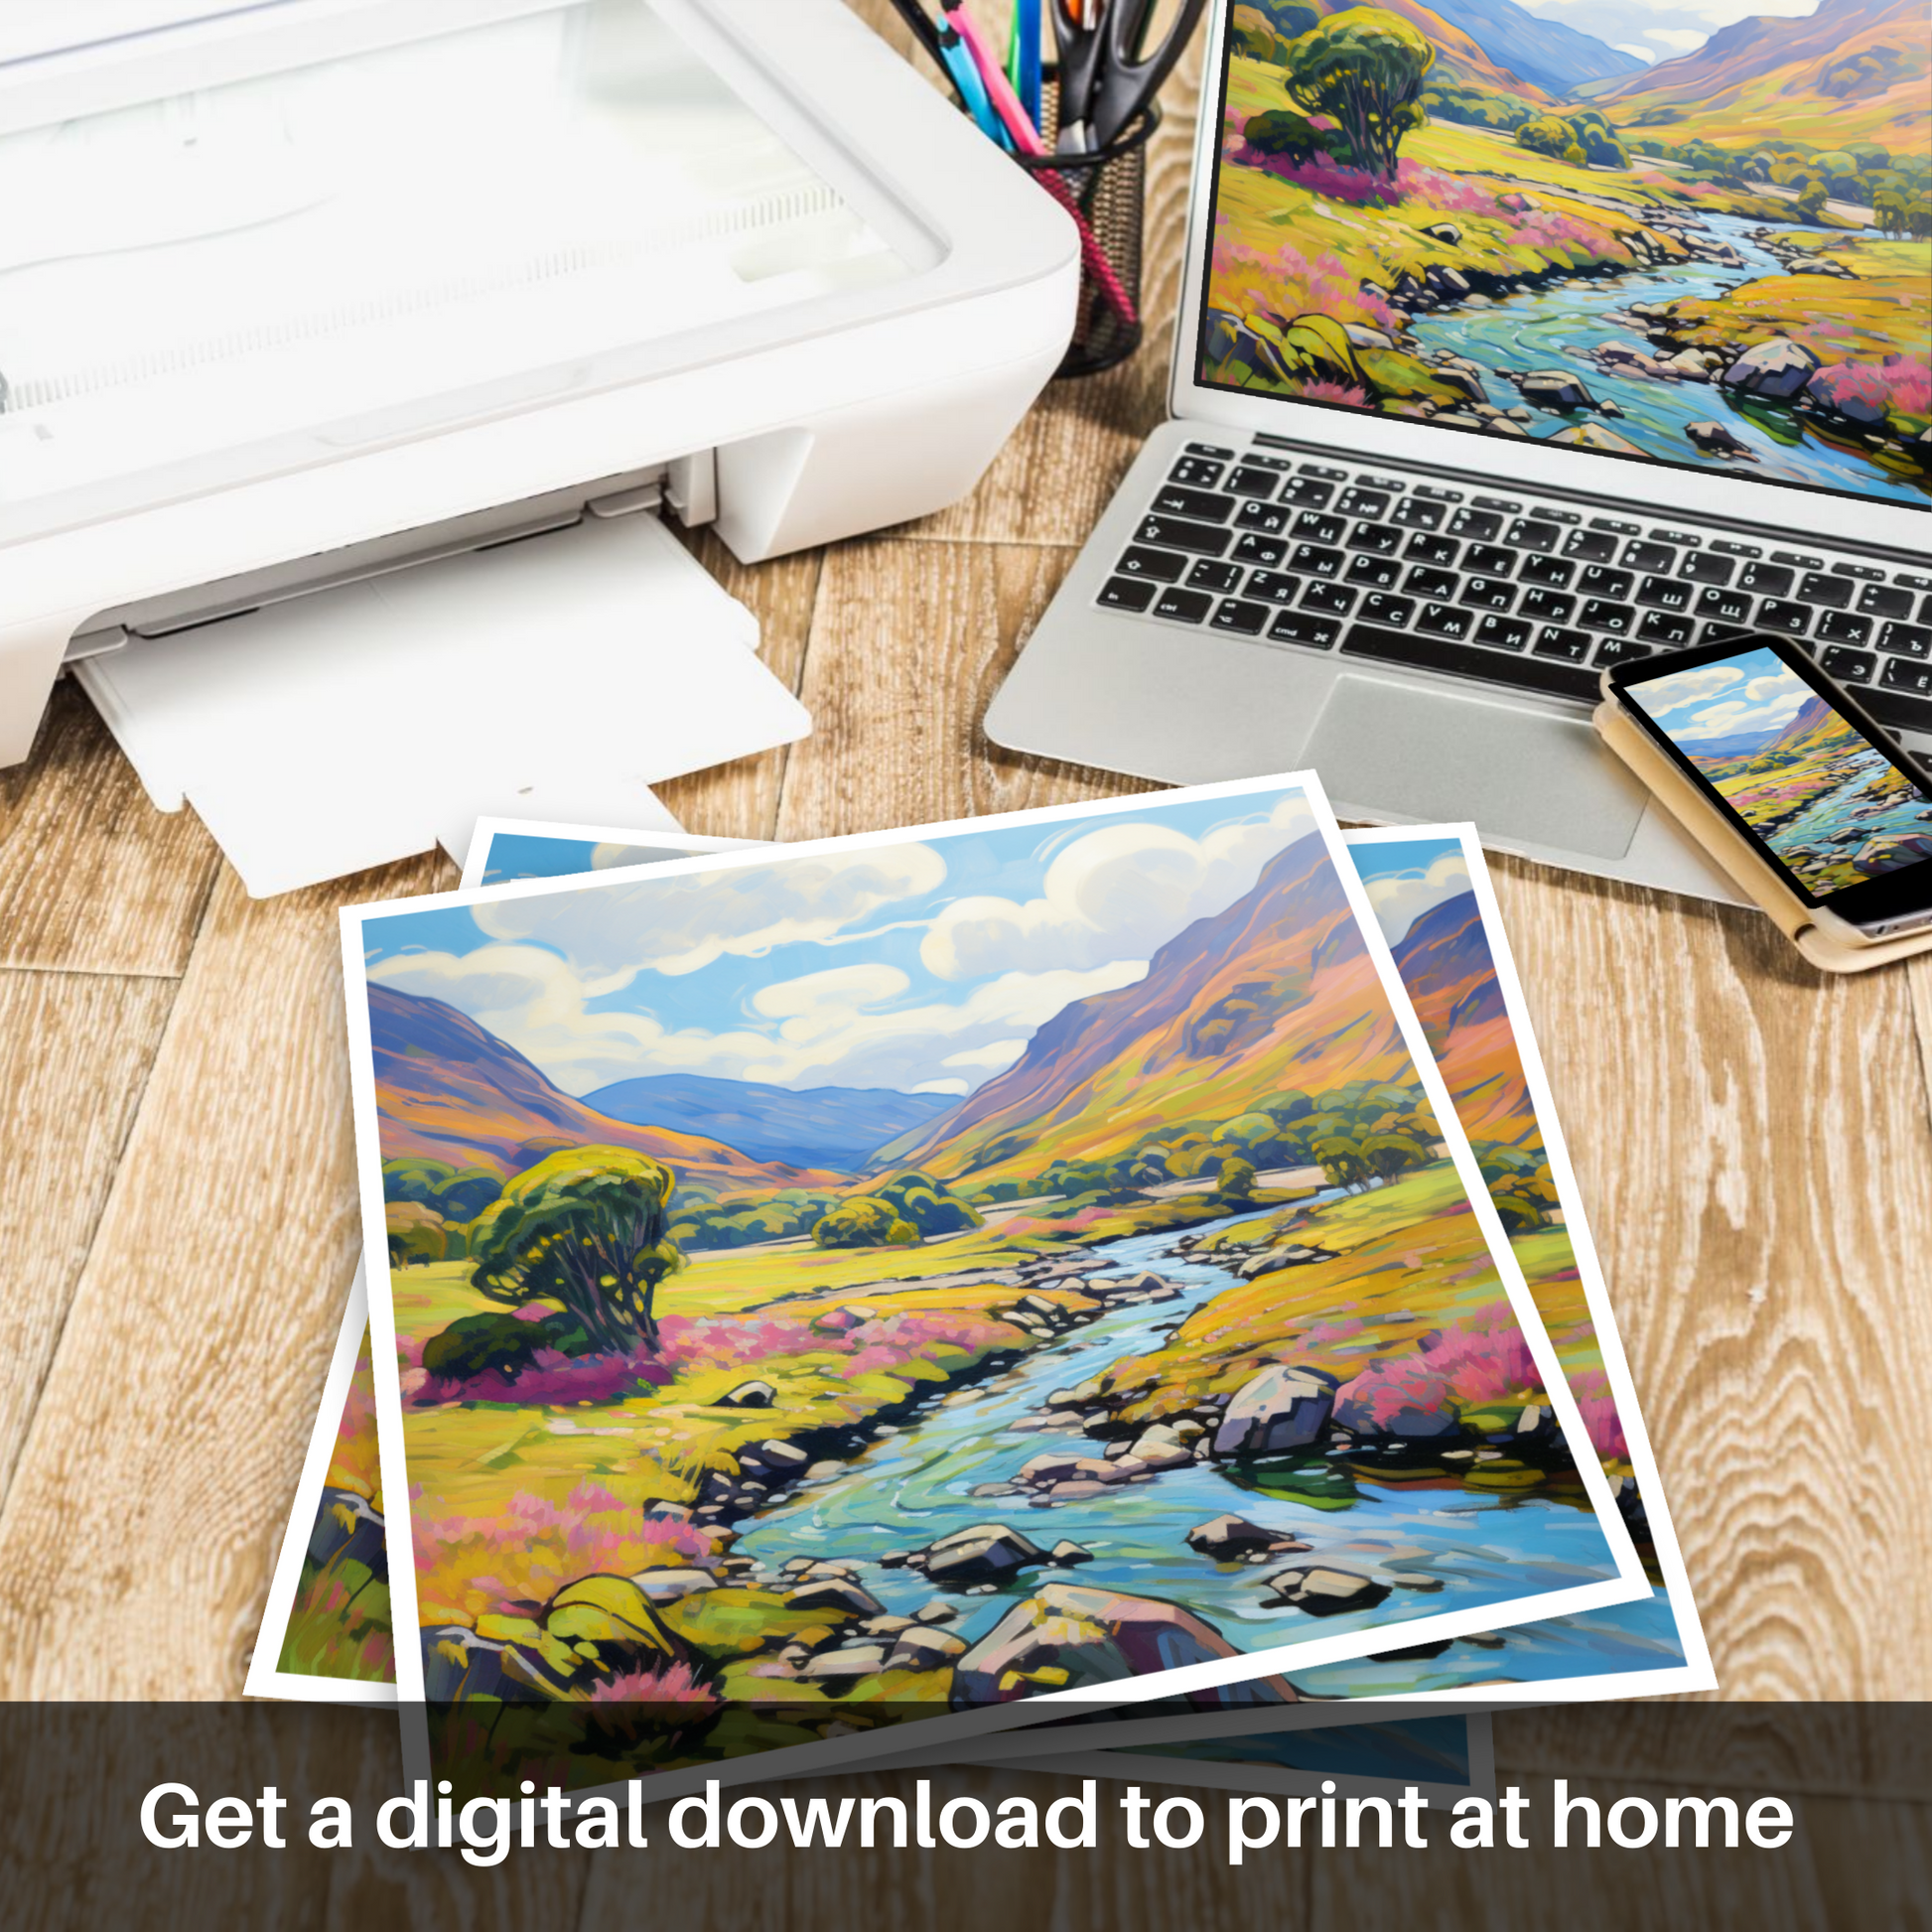 Downloadable and printable picture of Glen Feshie, Highlands in summer